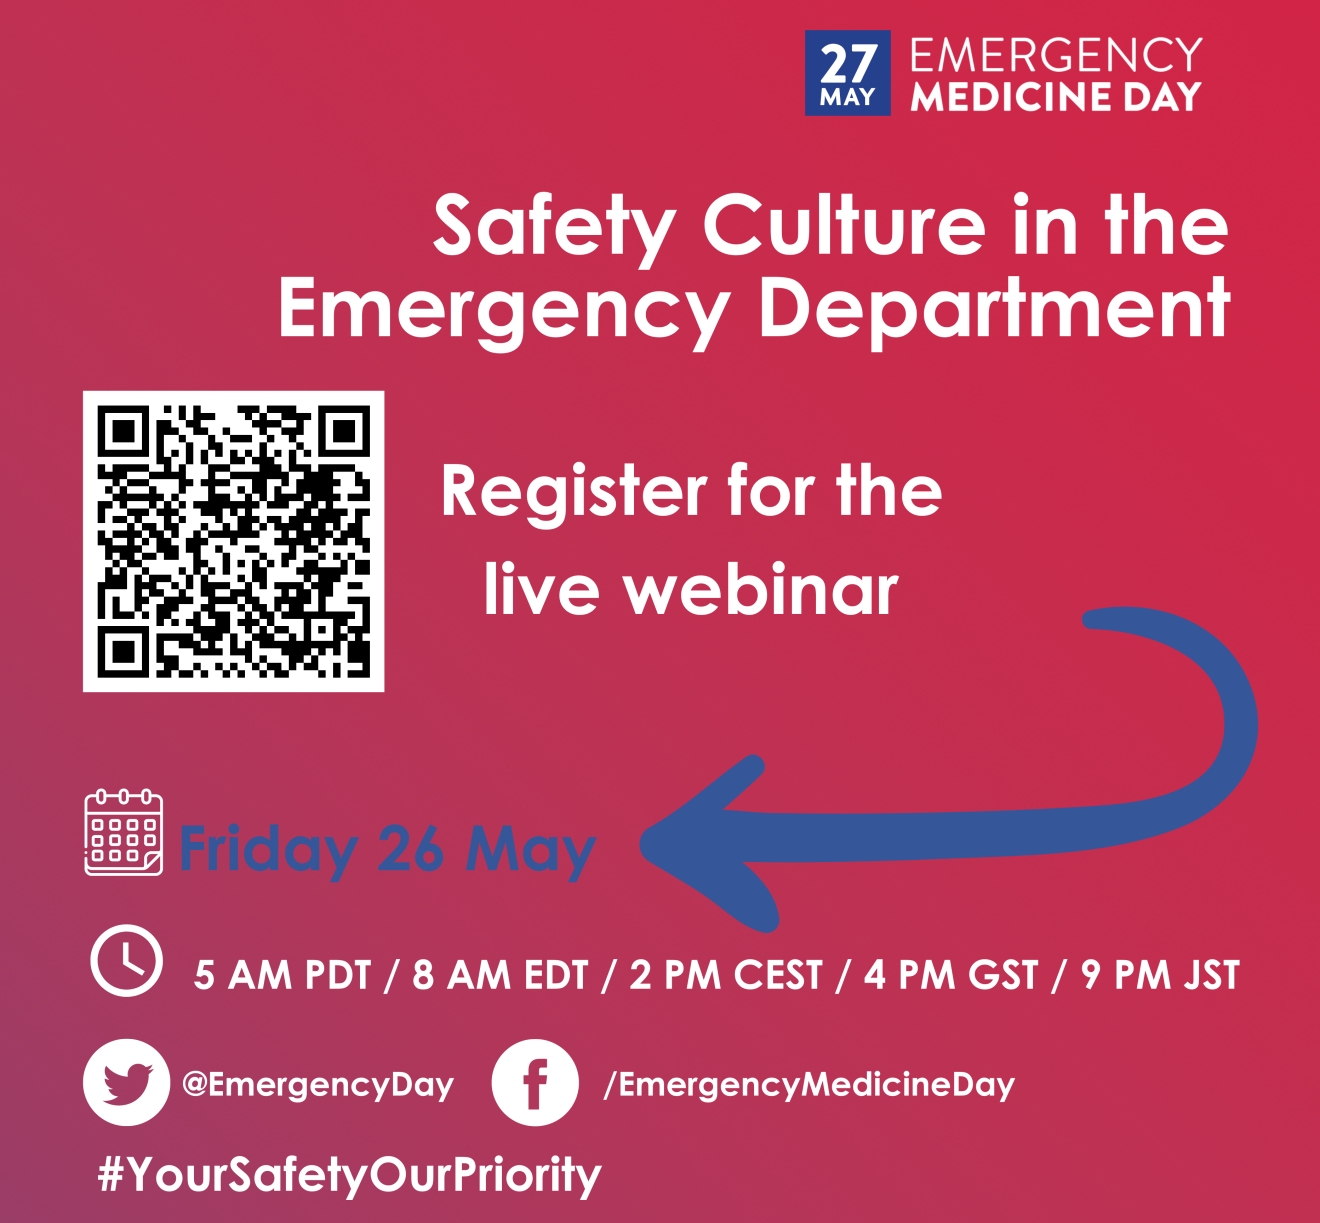 EM-Day webinar on demand: Safety Culture in the ED